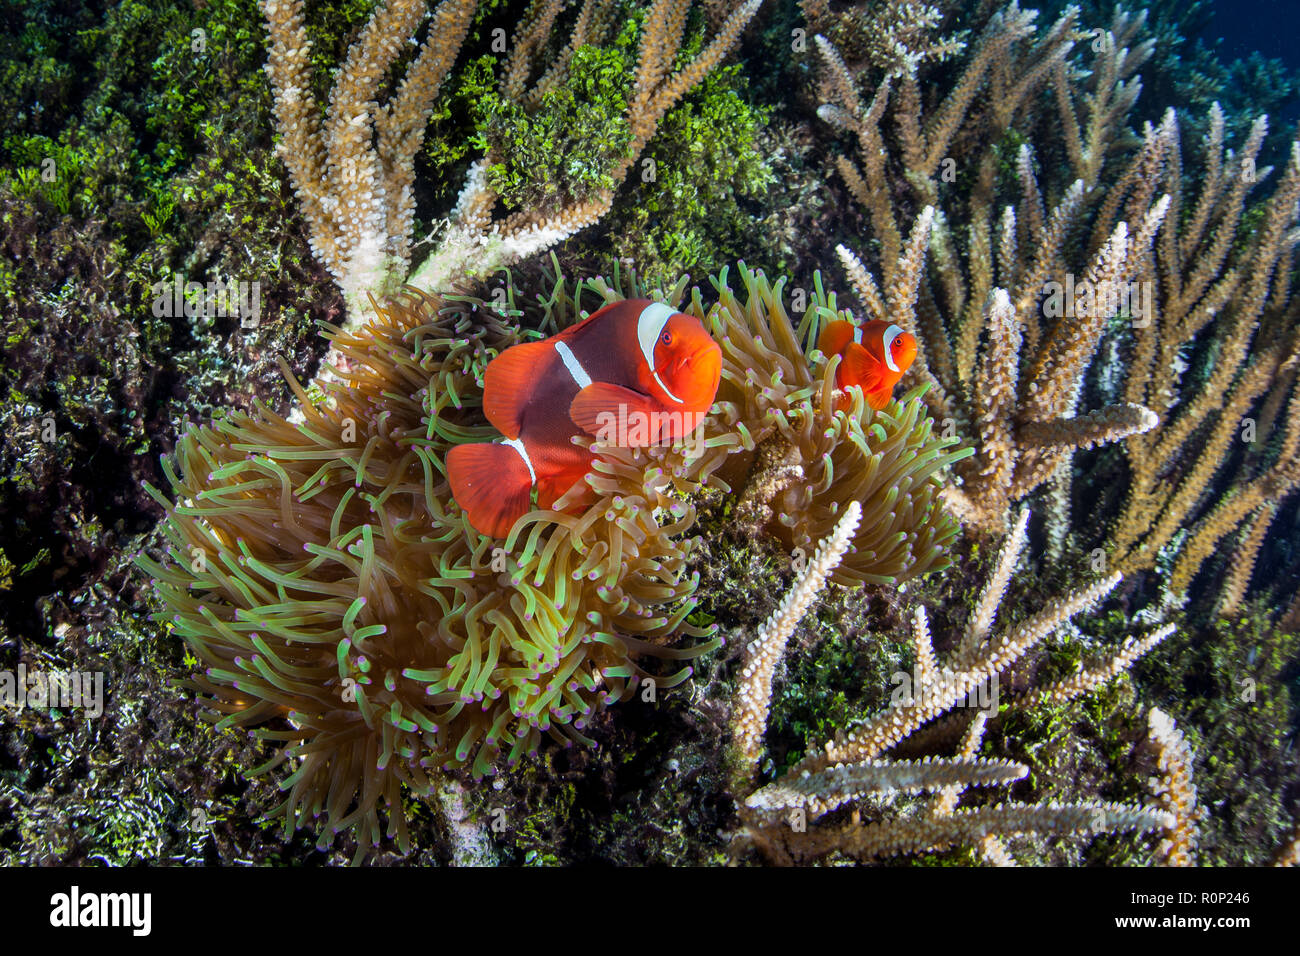 A Spinecheek anemonefish swims in its host anemone in Raja Ampat, Indonesia. This remote, tropical region is known as the heart of the Coral Triangle. Stock Photo